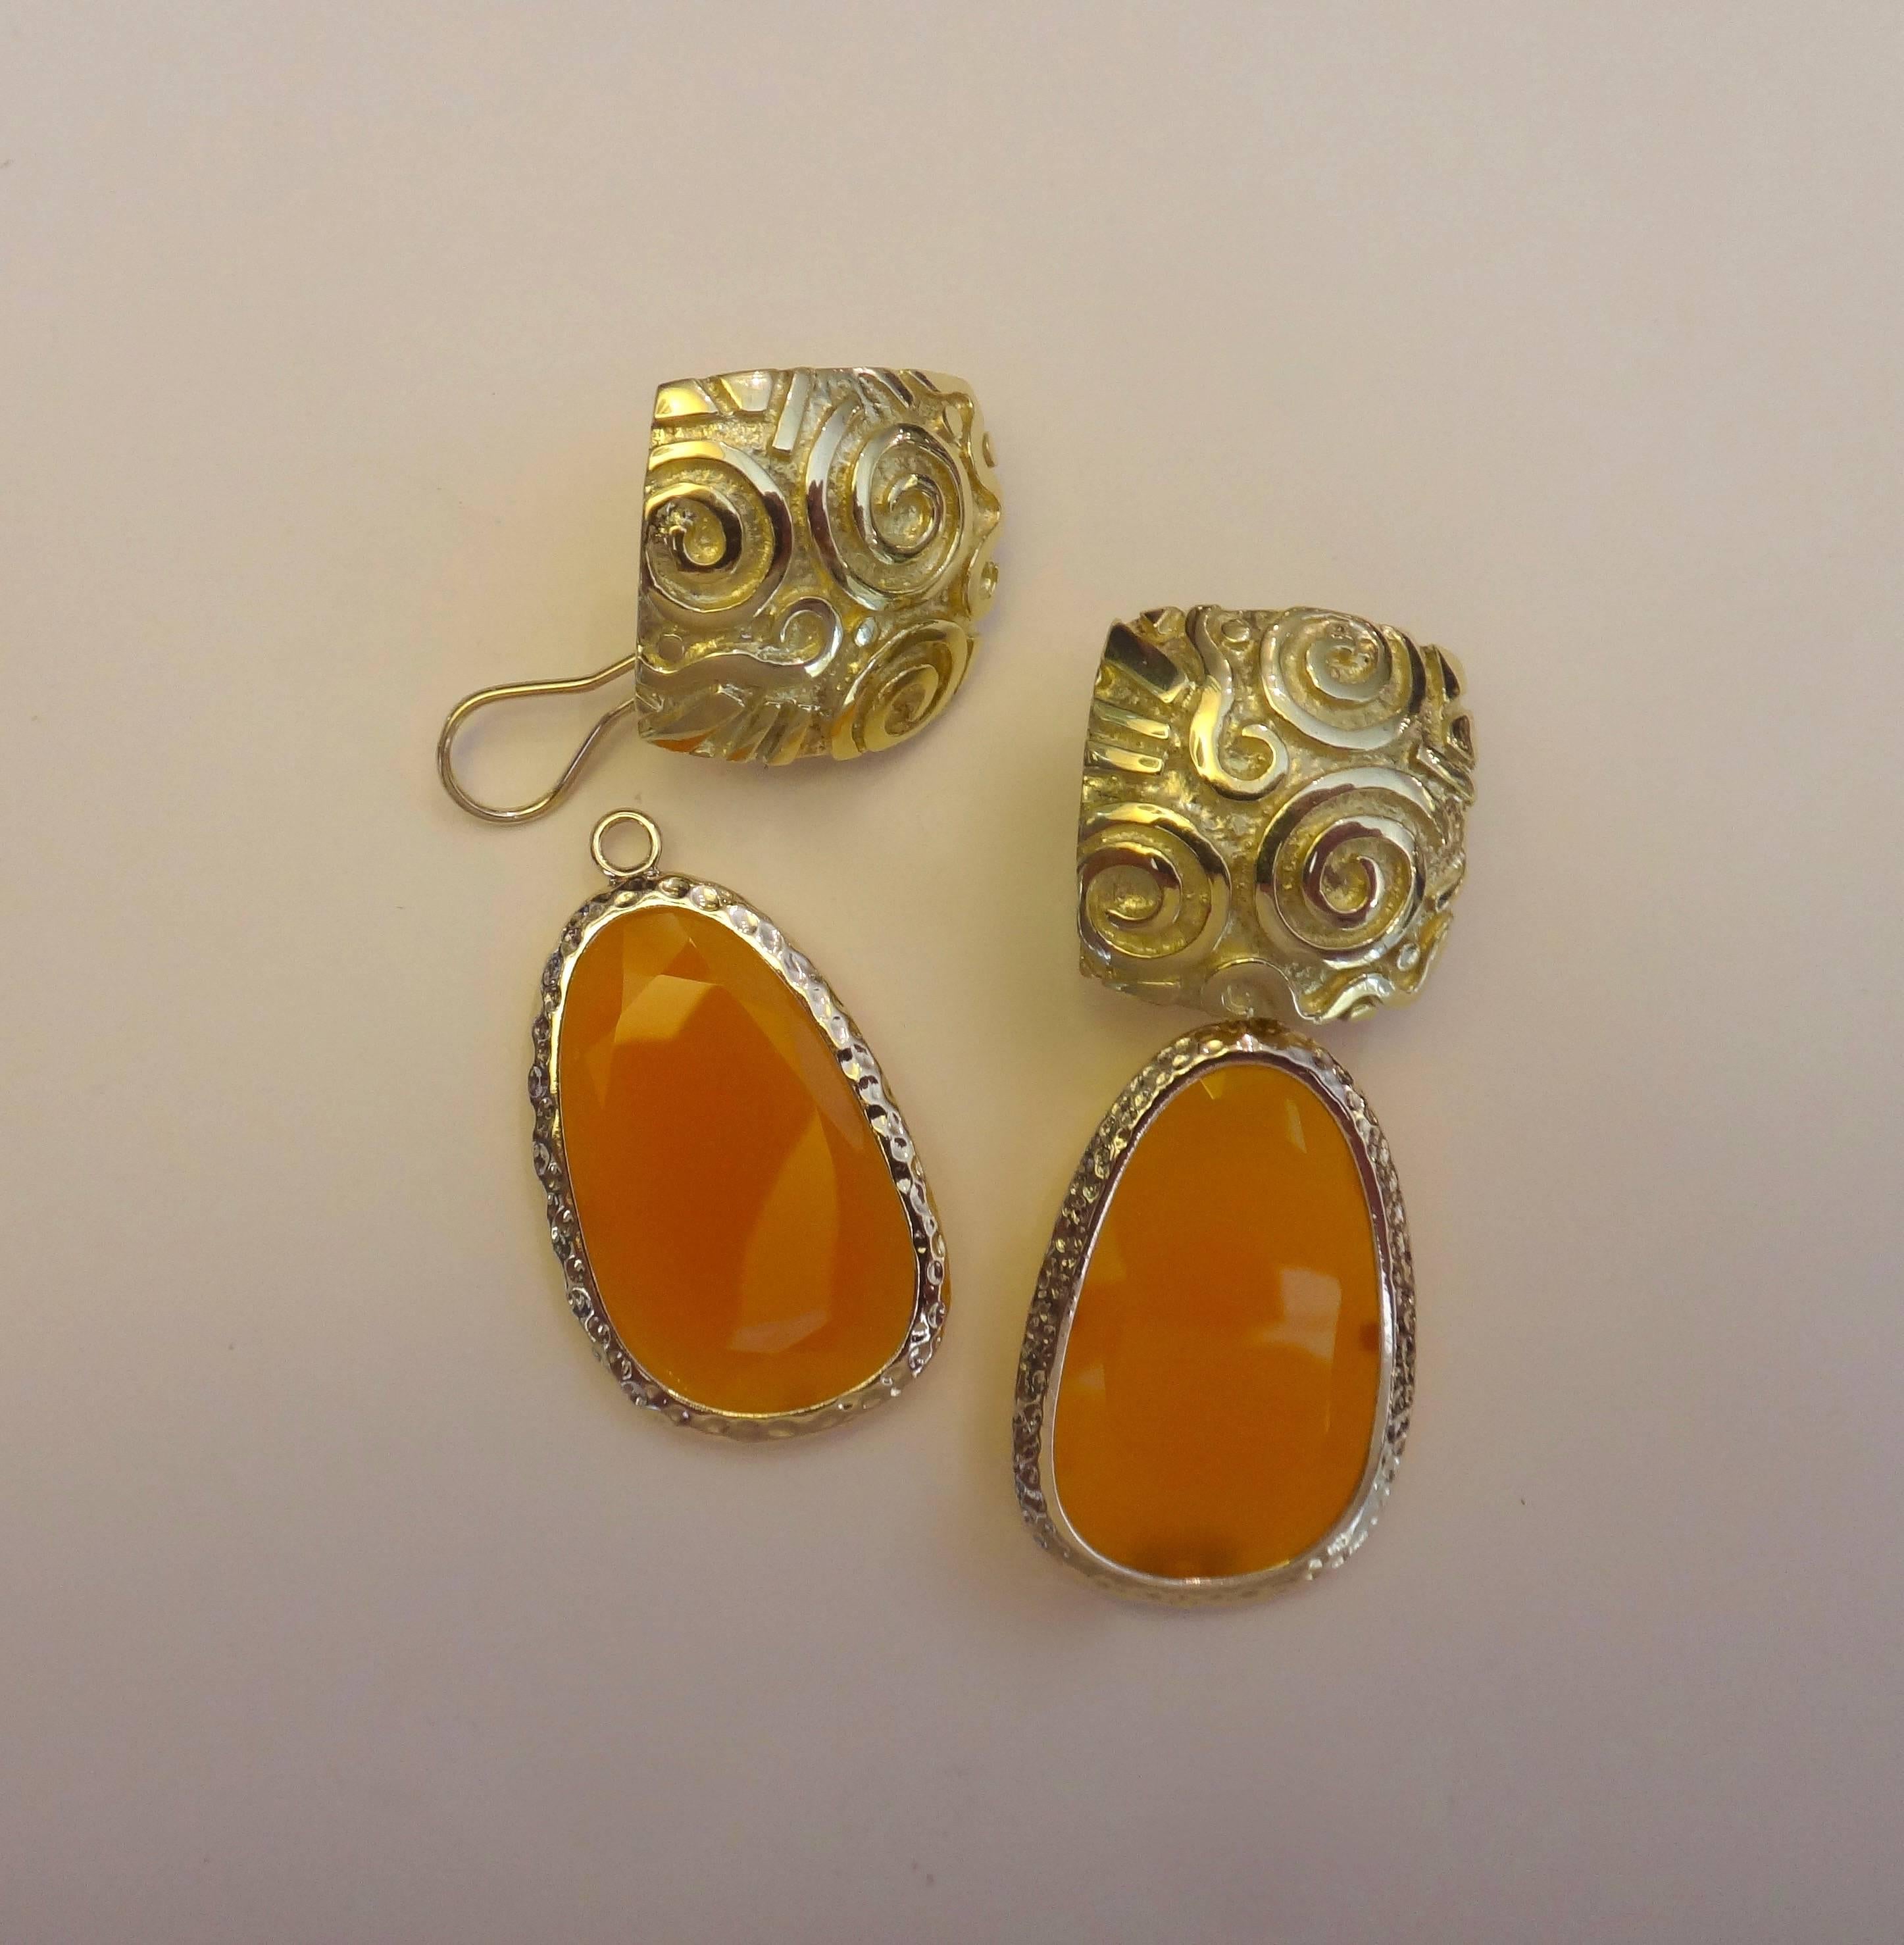 Michael Kneebone's "Go To" 18k yellow gold Petroglyph earrings are decorated with removable faceted slices of yellow chalcedony.  The spirals and squiggles  were inspired by the cave painting done by Native Americans of the great